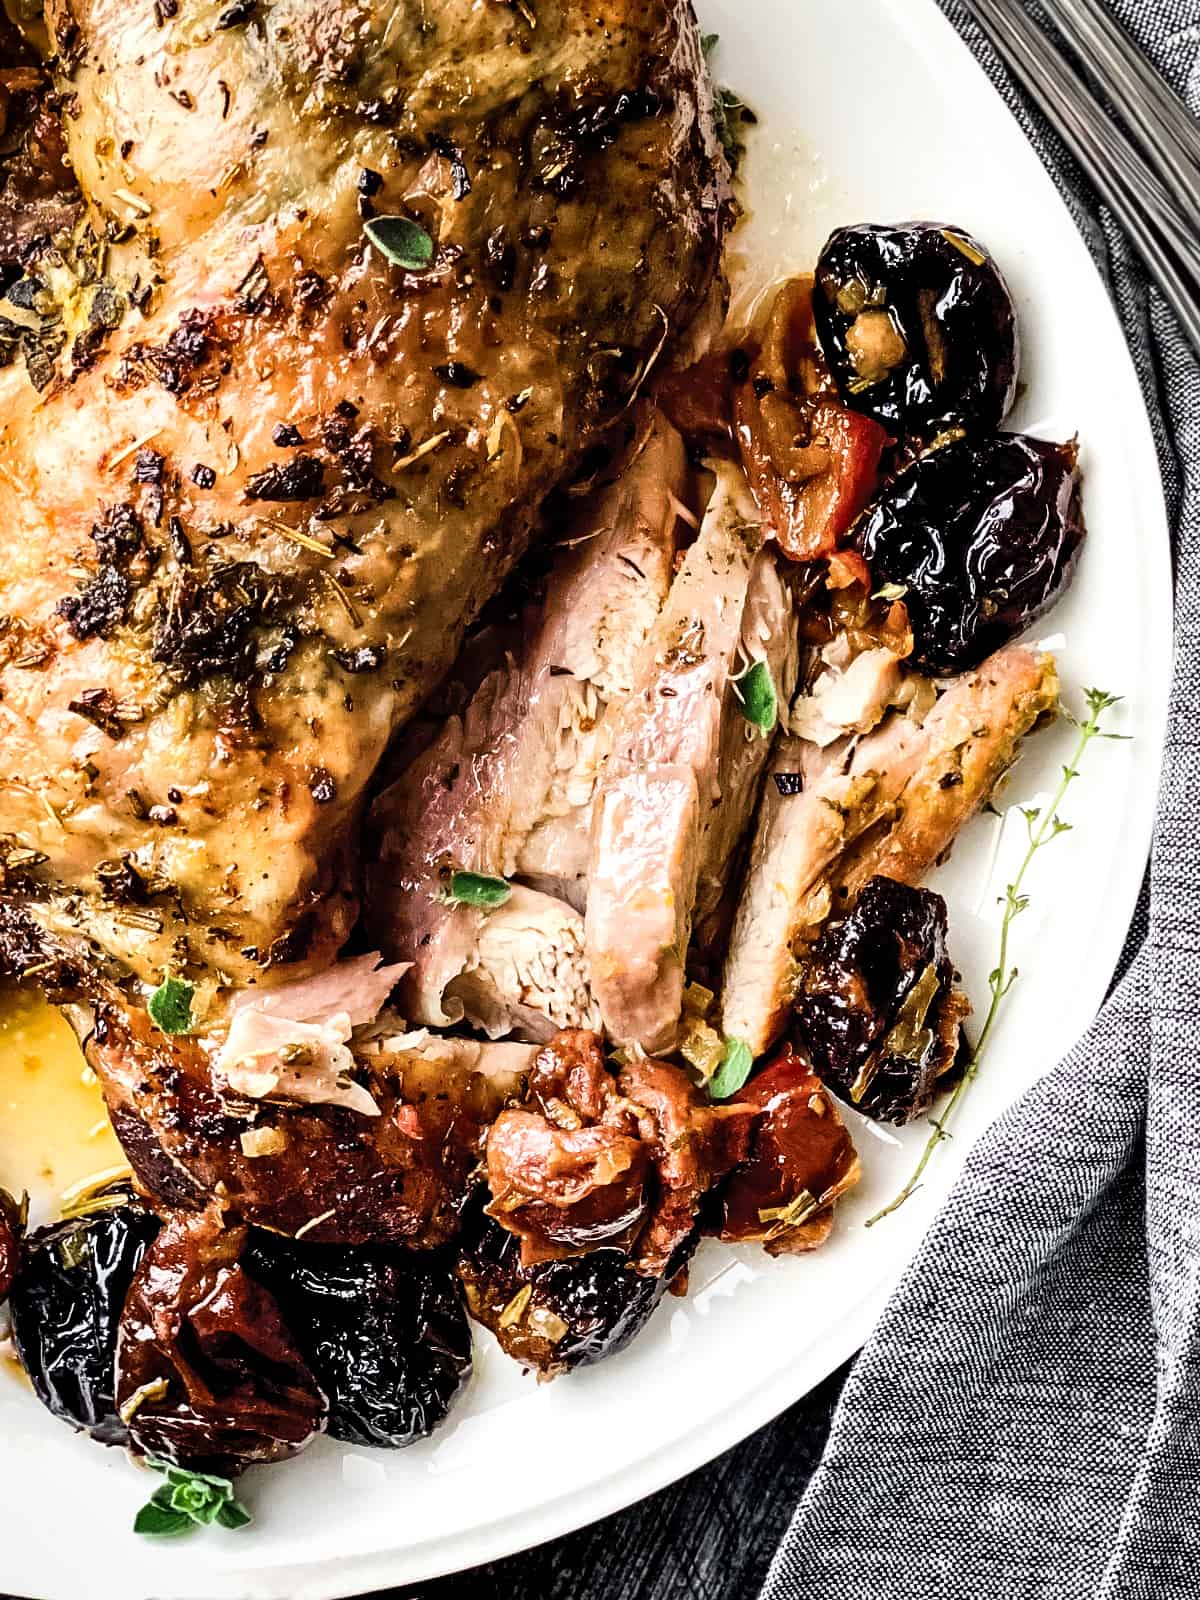 A roasted turkey thigh with sliced meat, some fresh herbs and dried fruit on a plate.